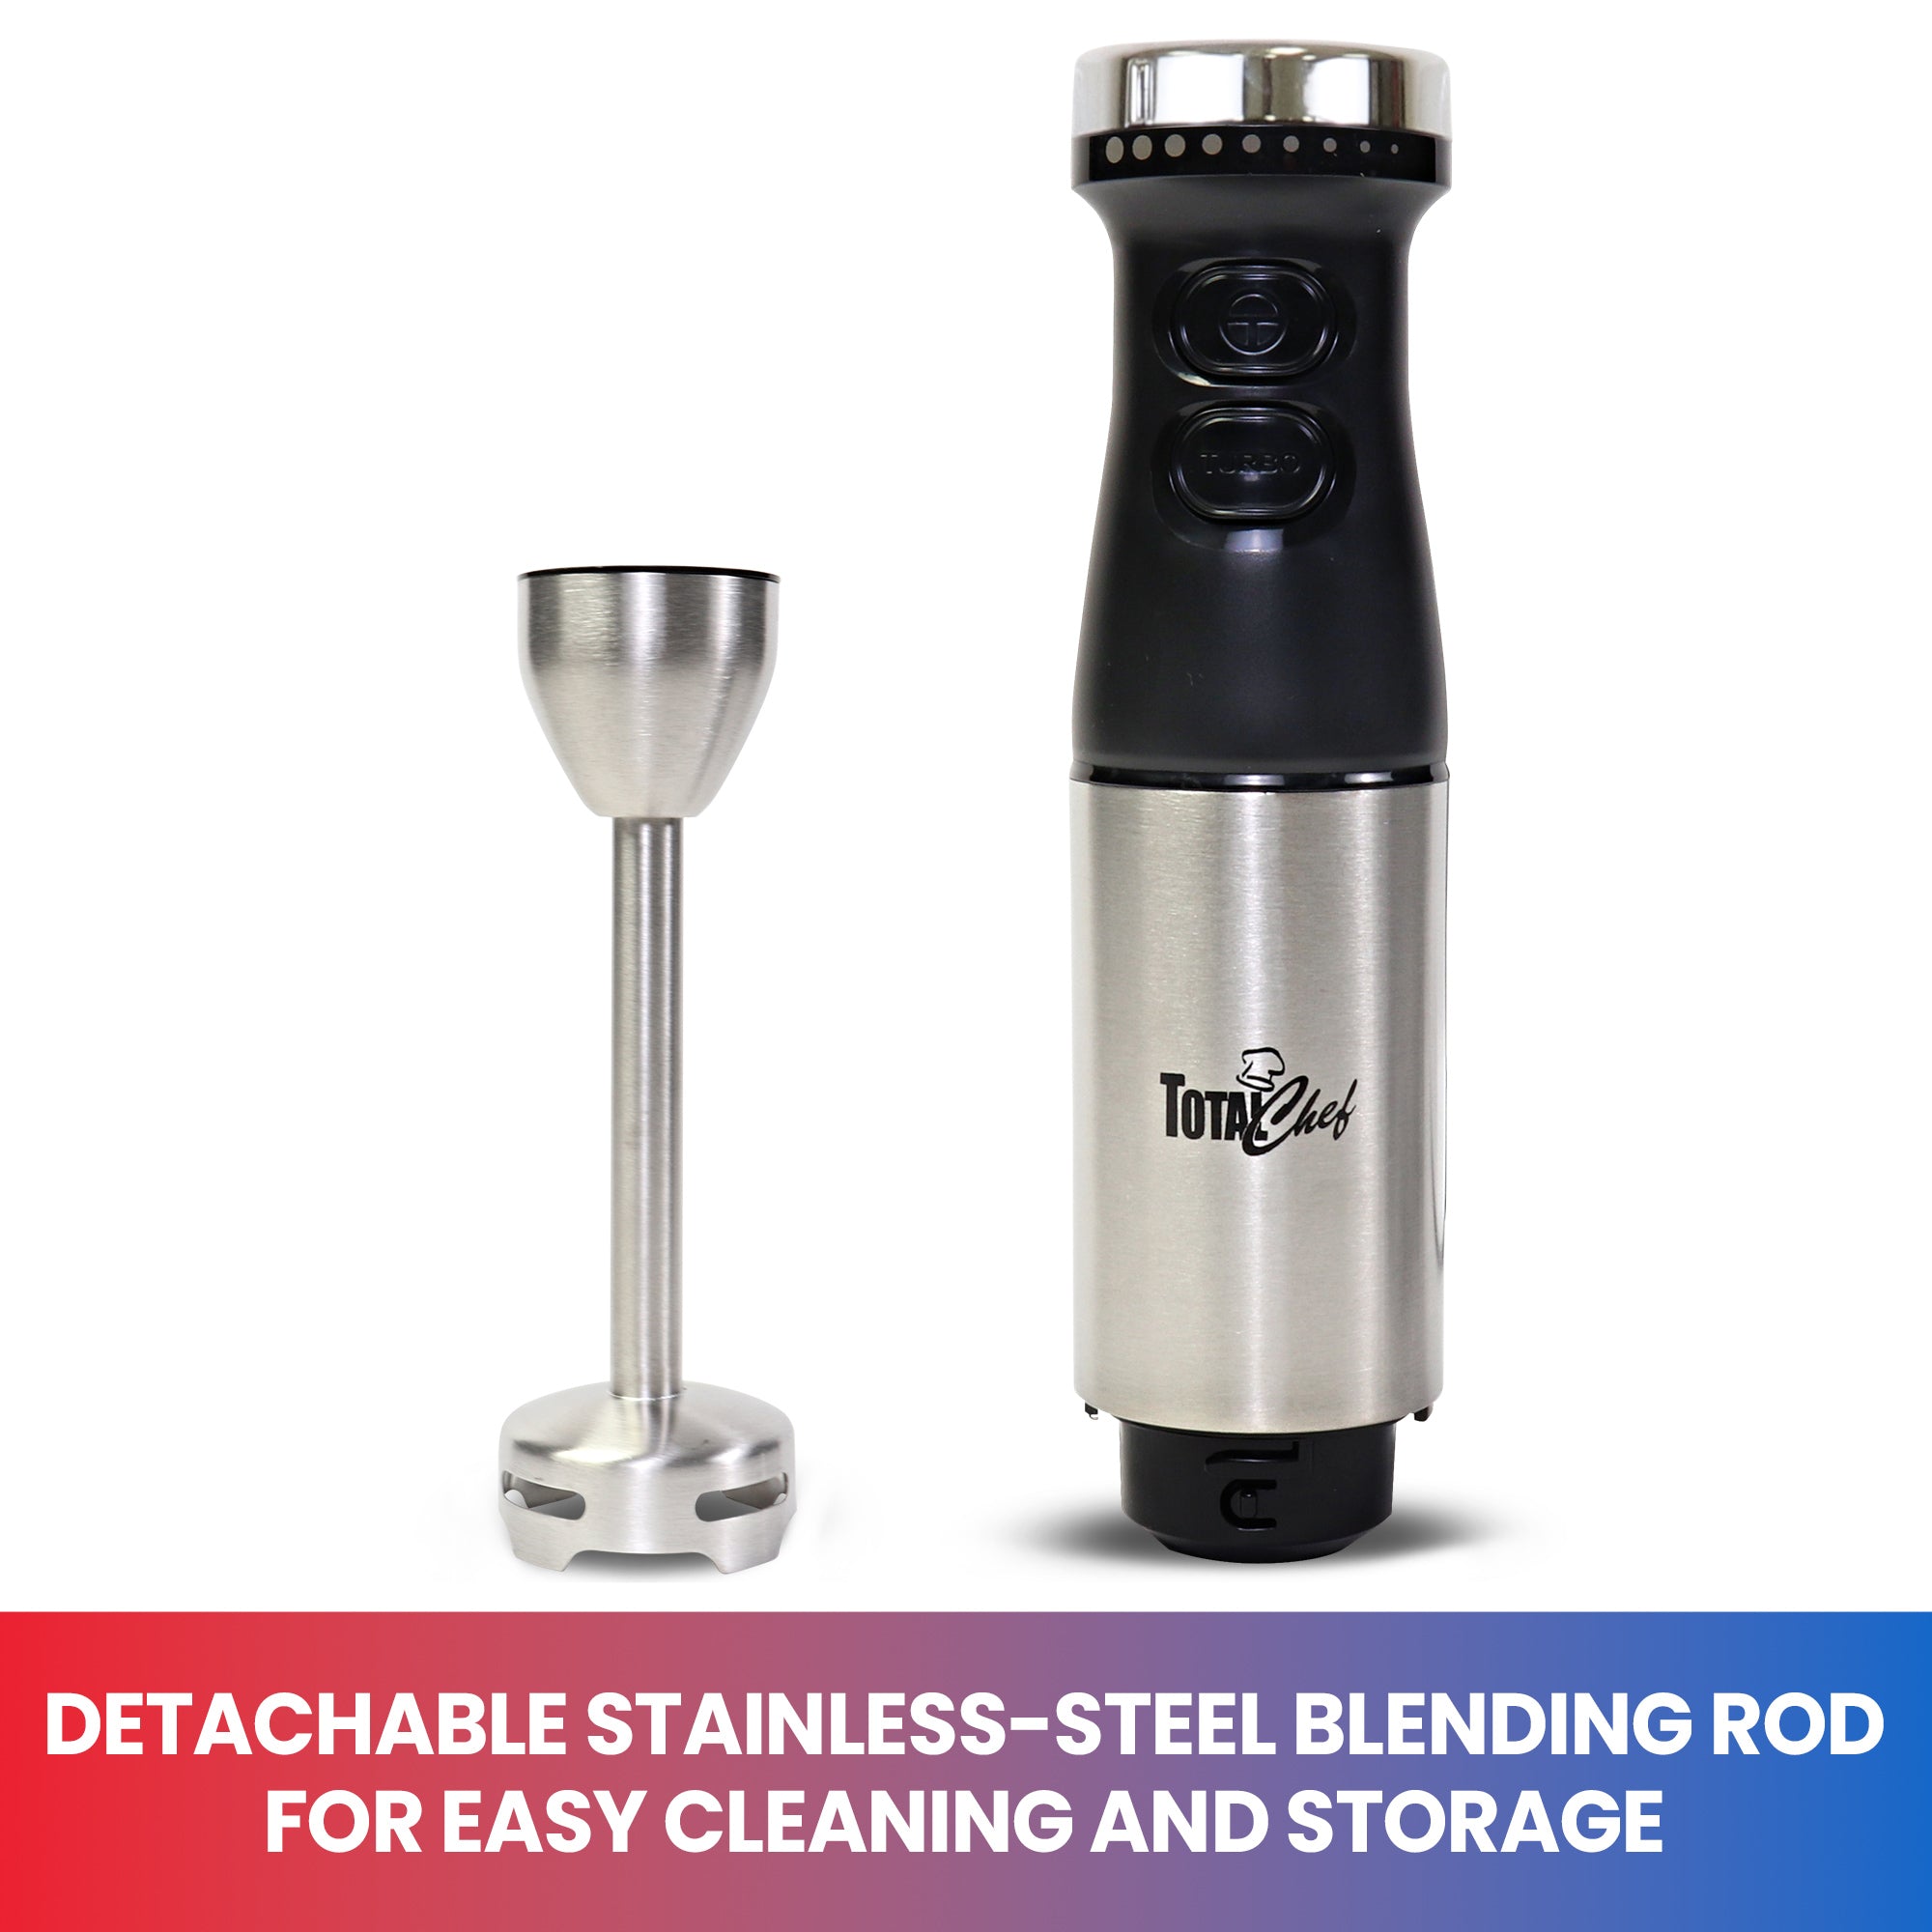 Product shot of blender disassembled with text below reading "Detachable stainless-steel blending rod for easy cleaning and storage"